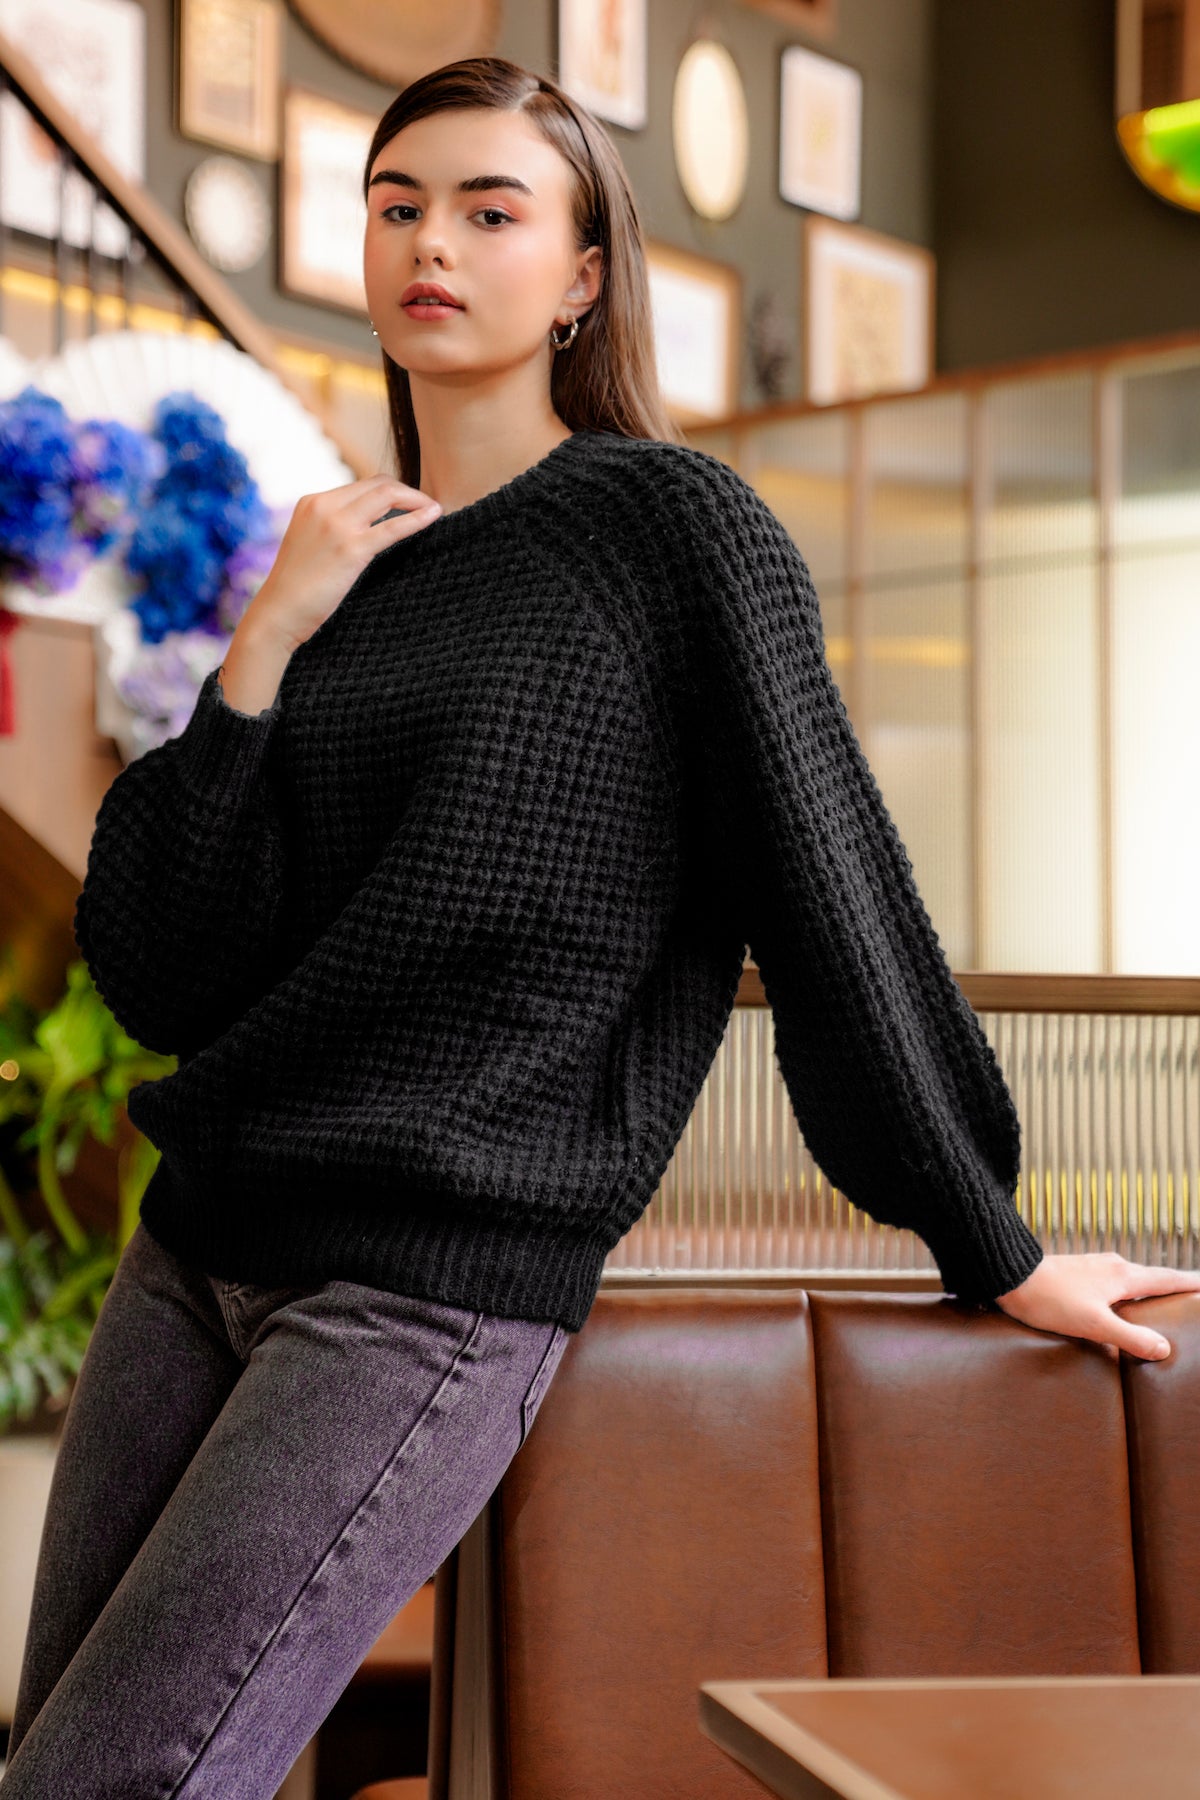 Willow Knit Sweater - Black